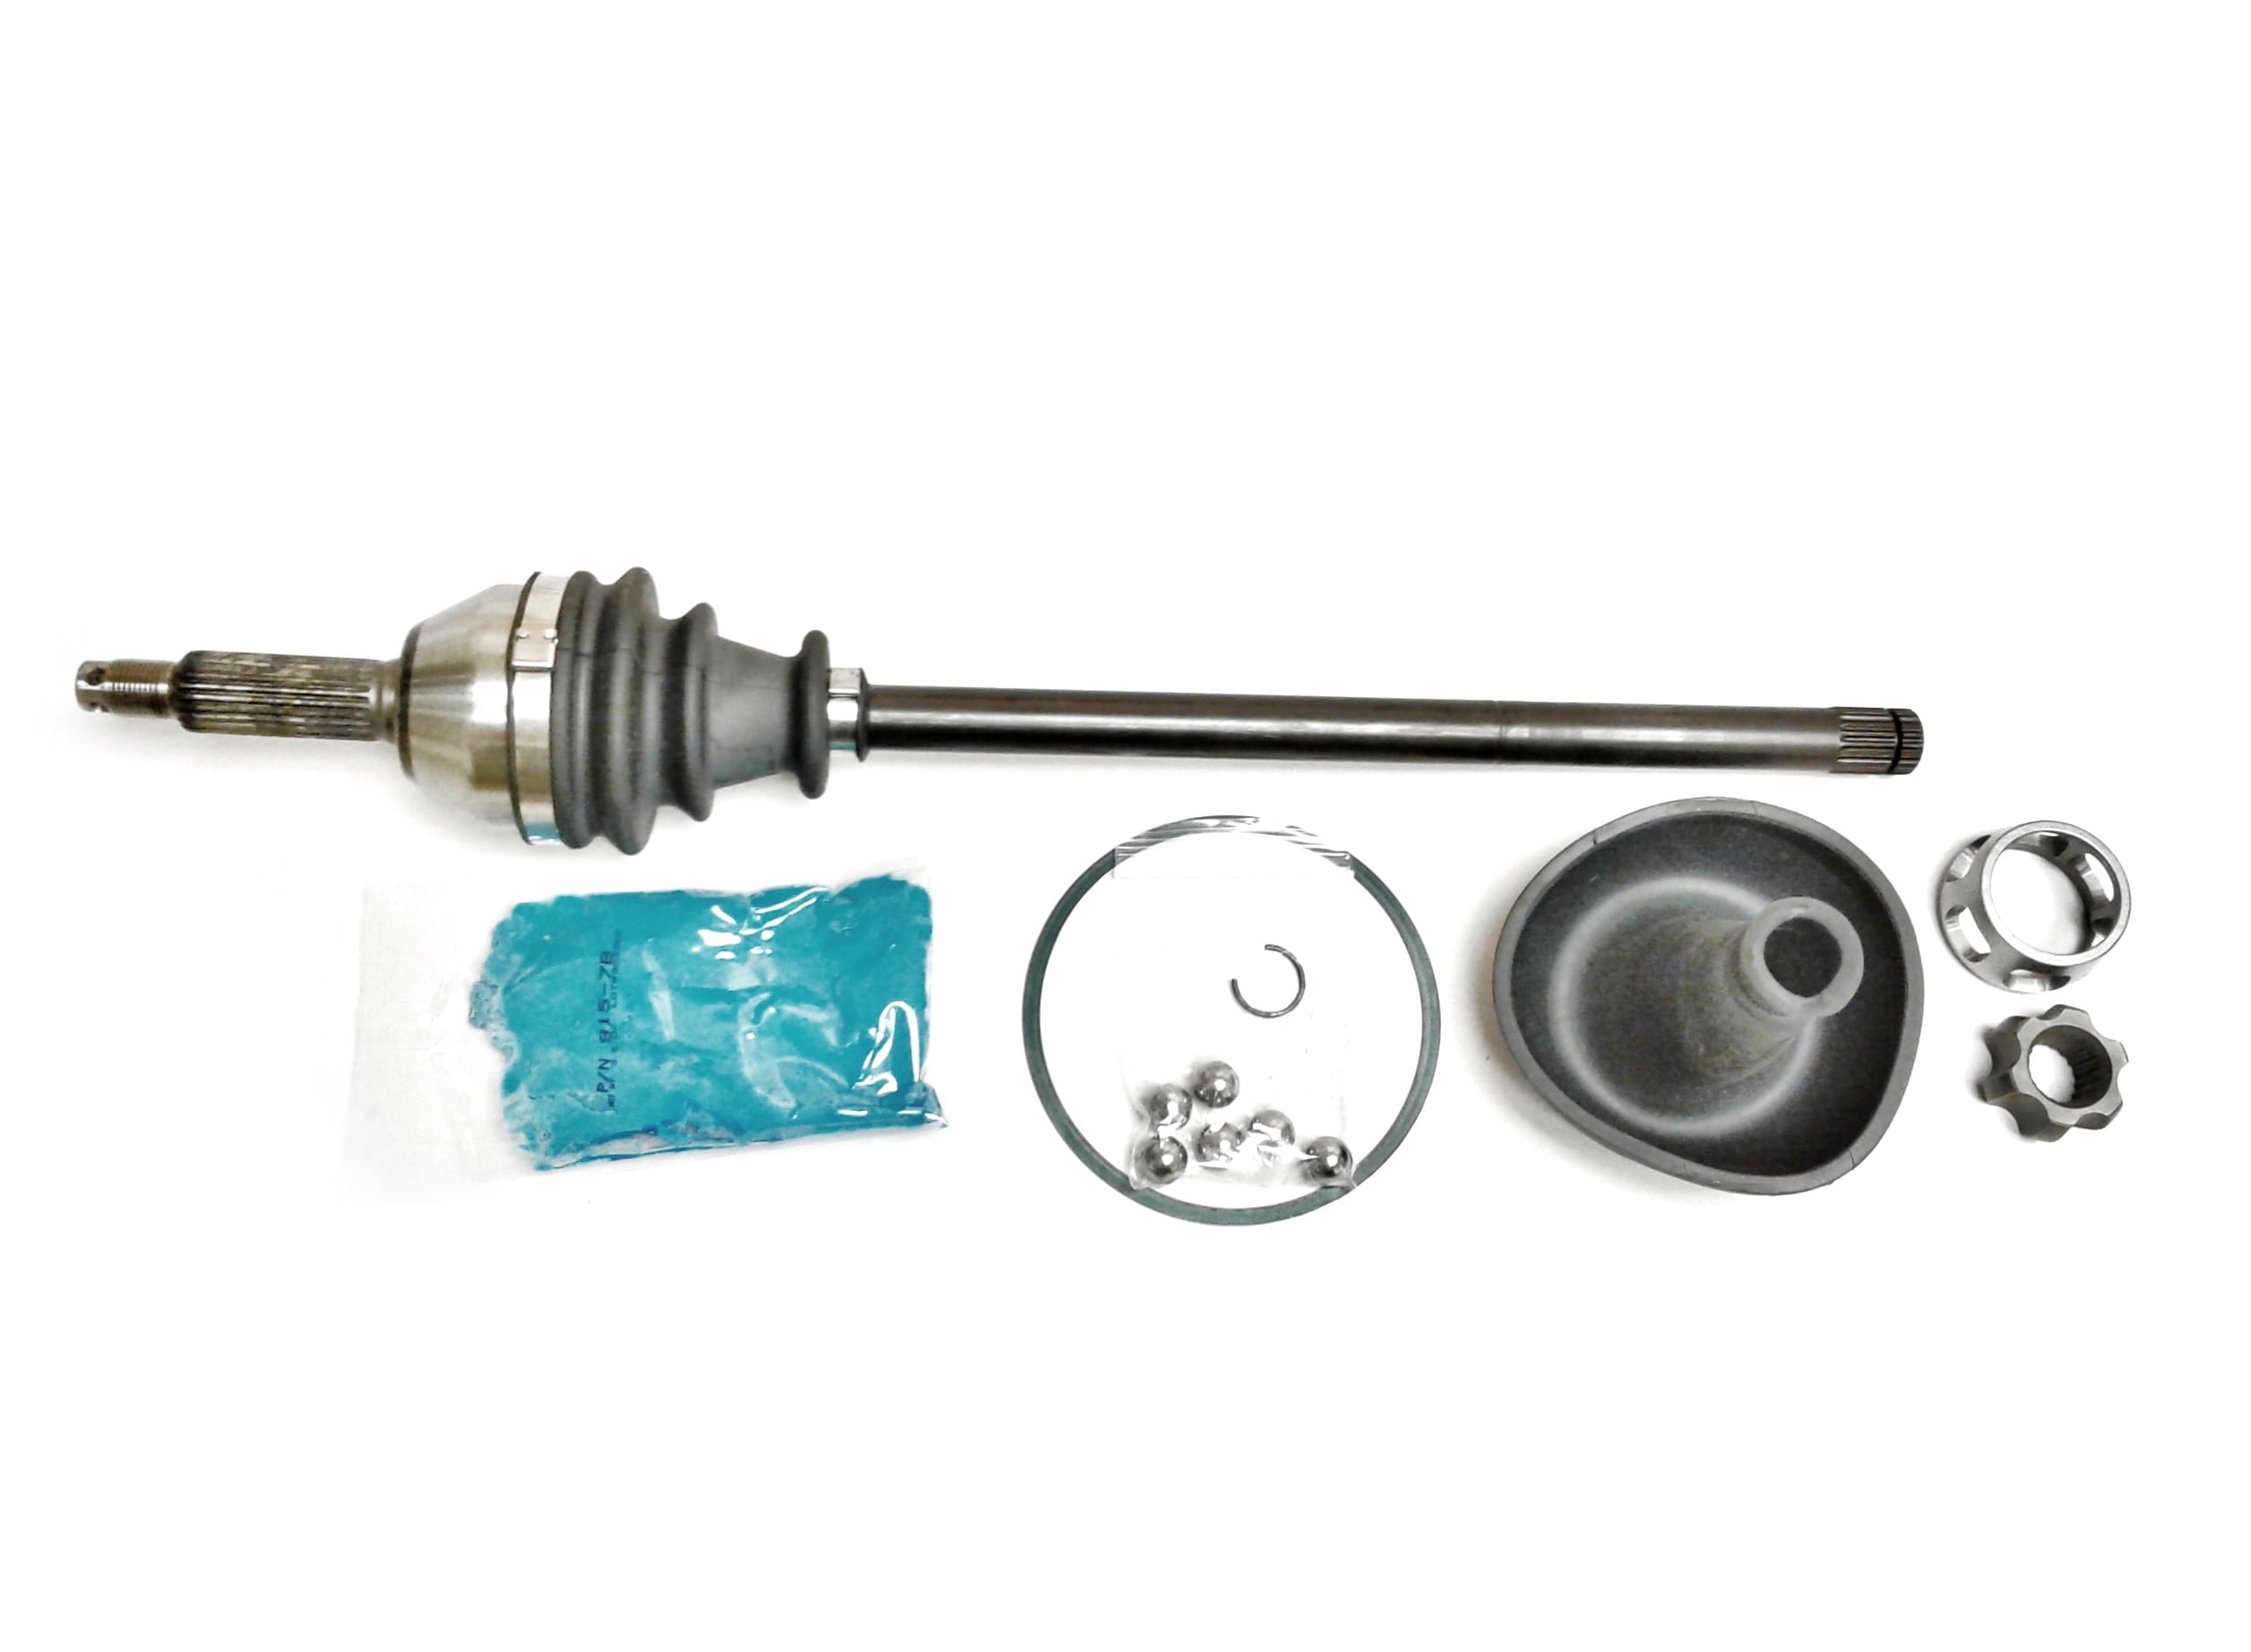 2007-2011 Outlaw 525 IRS 2x4 ATV ATV Parts Connection Rear Axle Inner Joint Rebuild Kit for 2006-2007 Polaris Outlaw 500 IRS